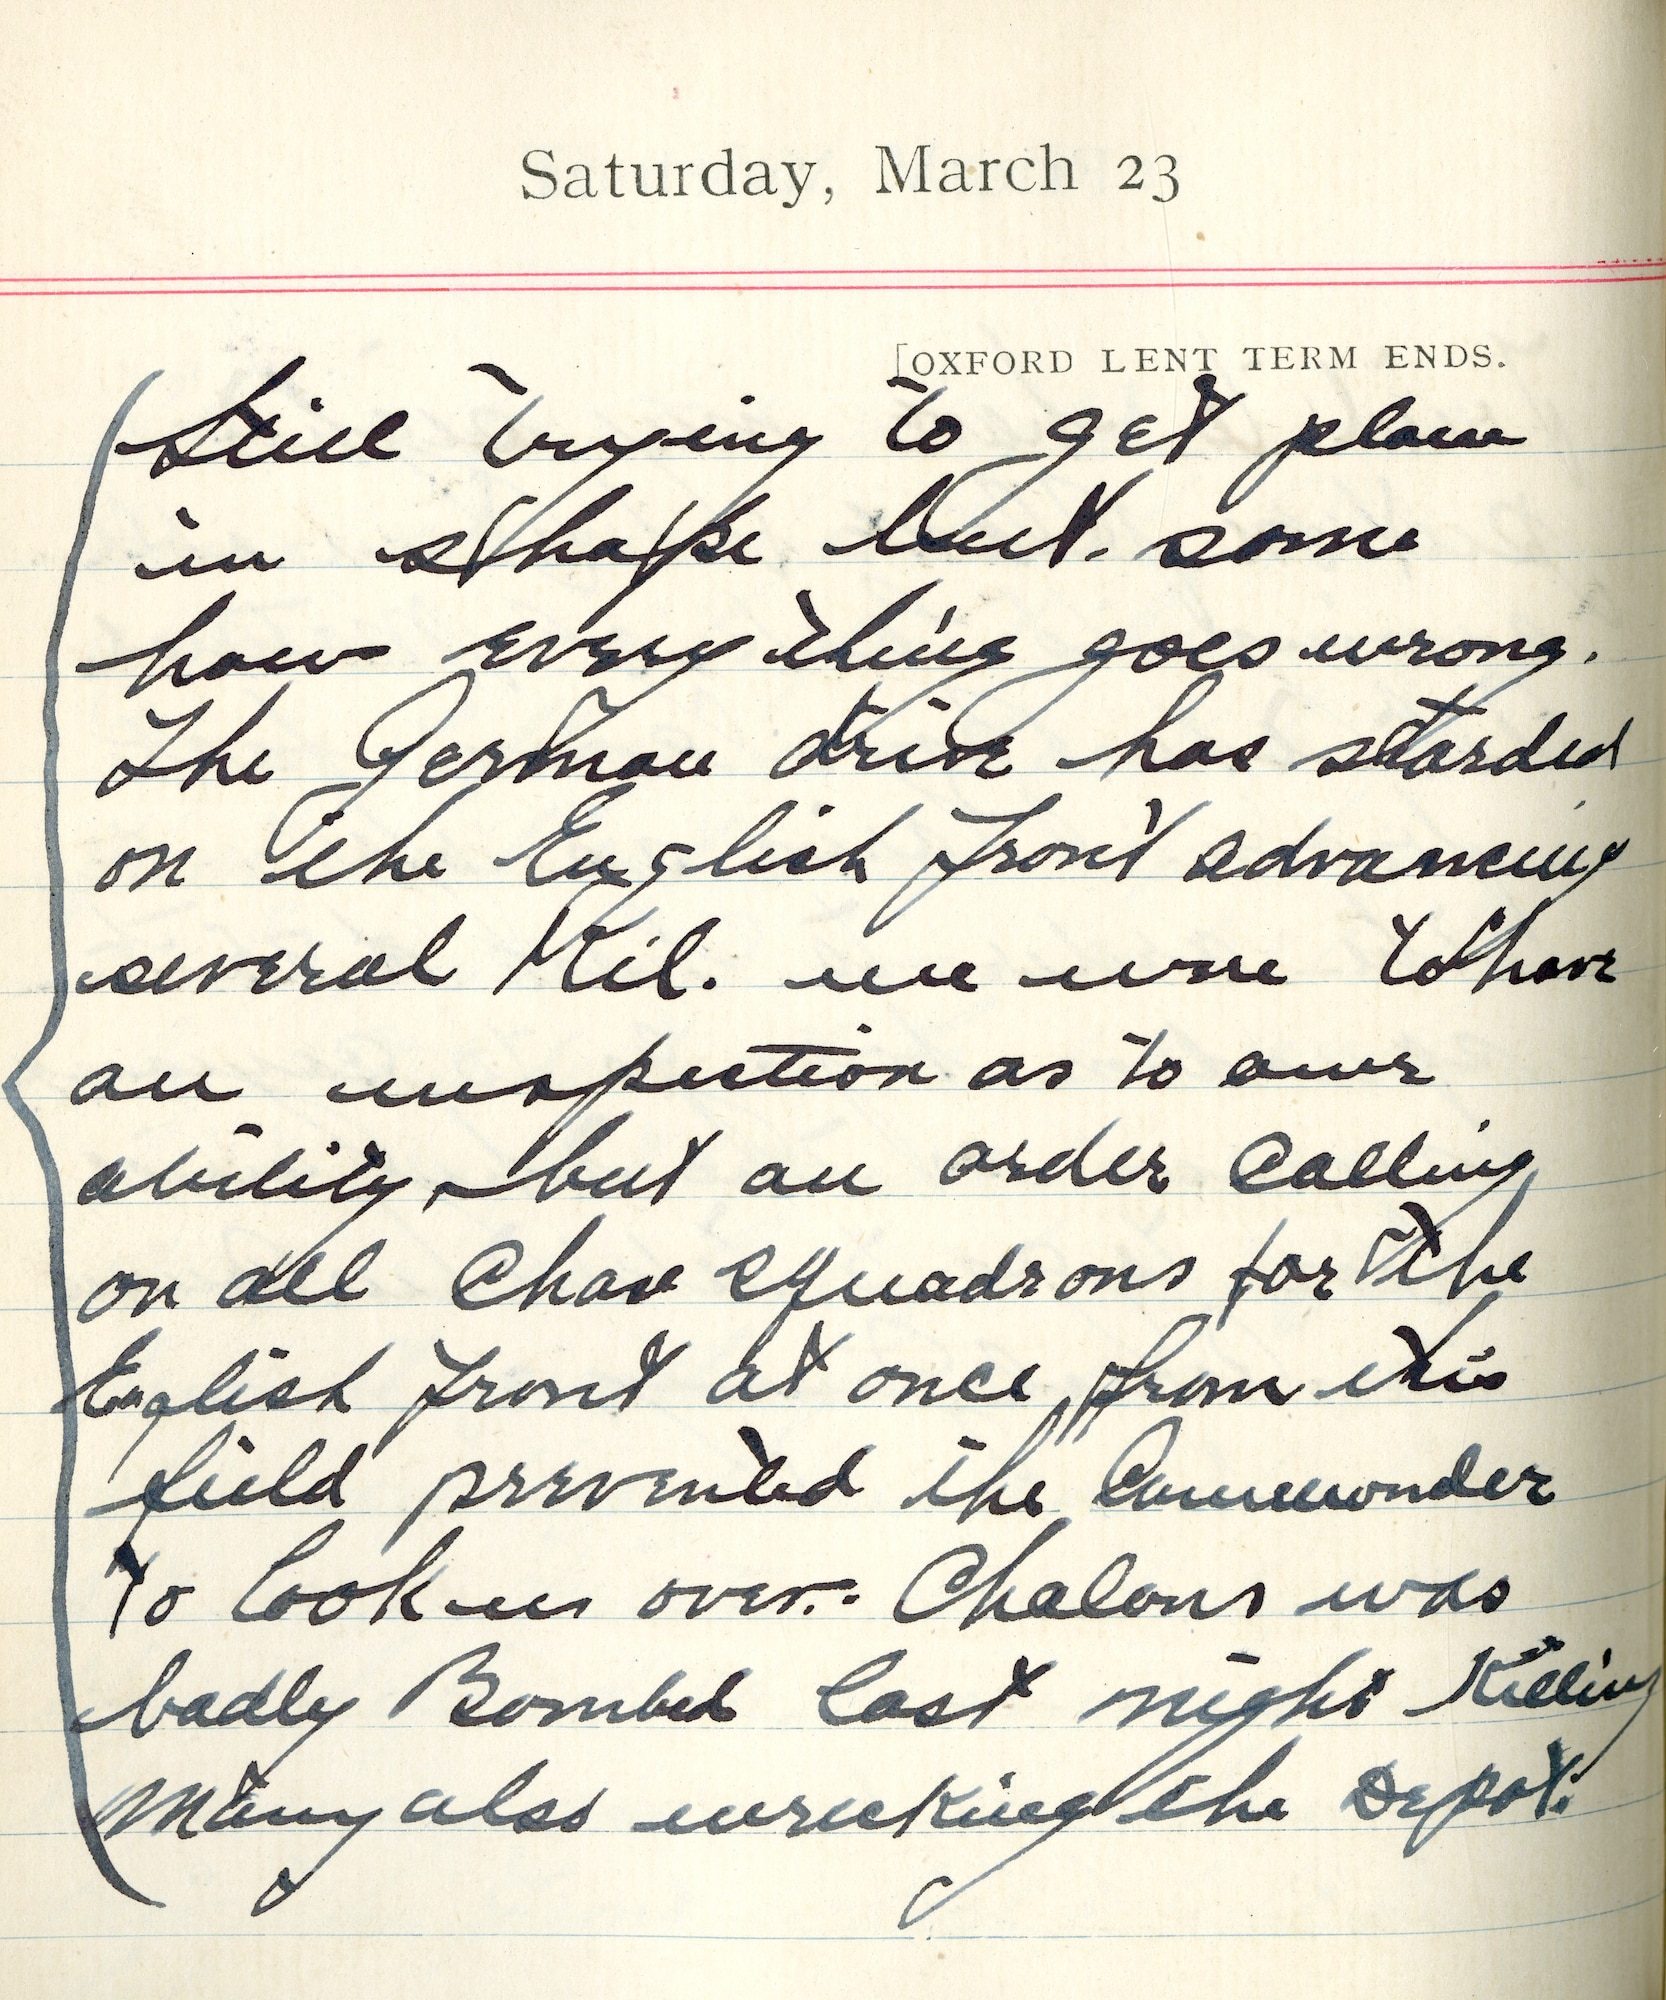 Capt. Edward V. Rickenbacker's 1918 wartime diary entry. (03/23/1918).

Still trying to get planes in shape but some how everything goes wrong.  The Germans drive has started on the English Front advancing several kil.  We were to have an inspection as to our ability, but an order calling on all chase squadrons for the English Front at once from this field prevented the commander to look us over.  Chalons was badly bombed last night killing many, also wrecking the depot.